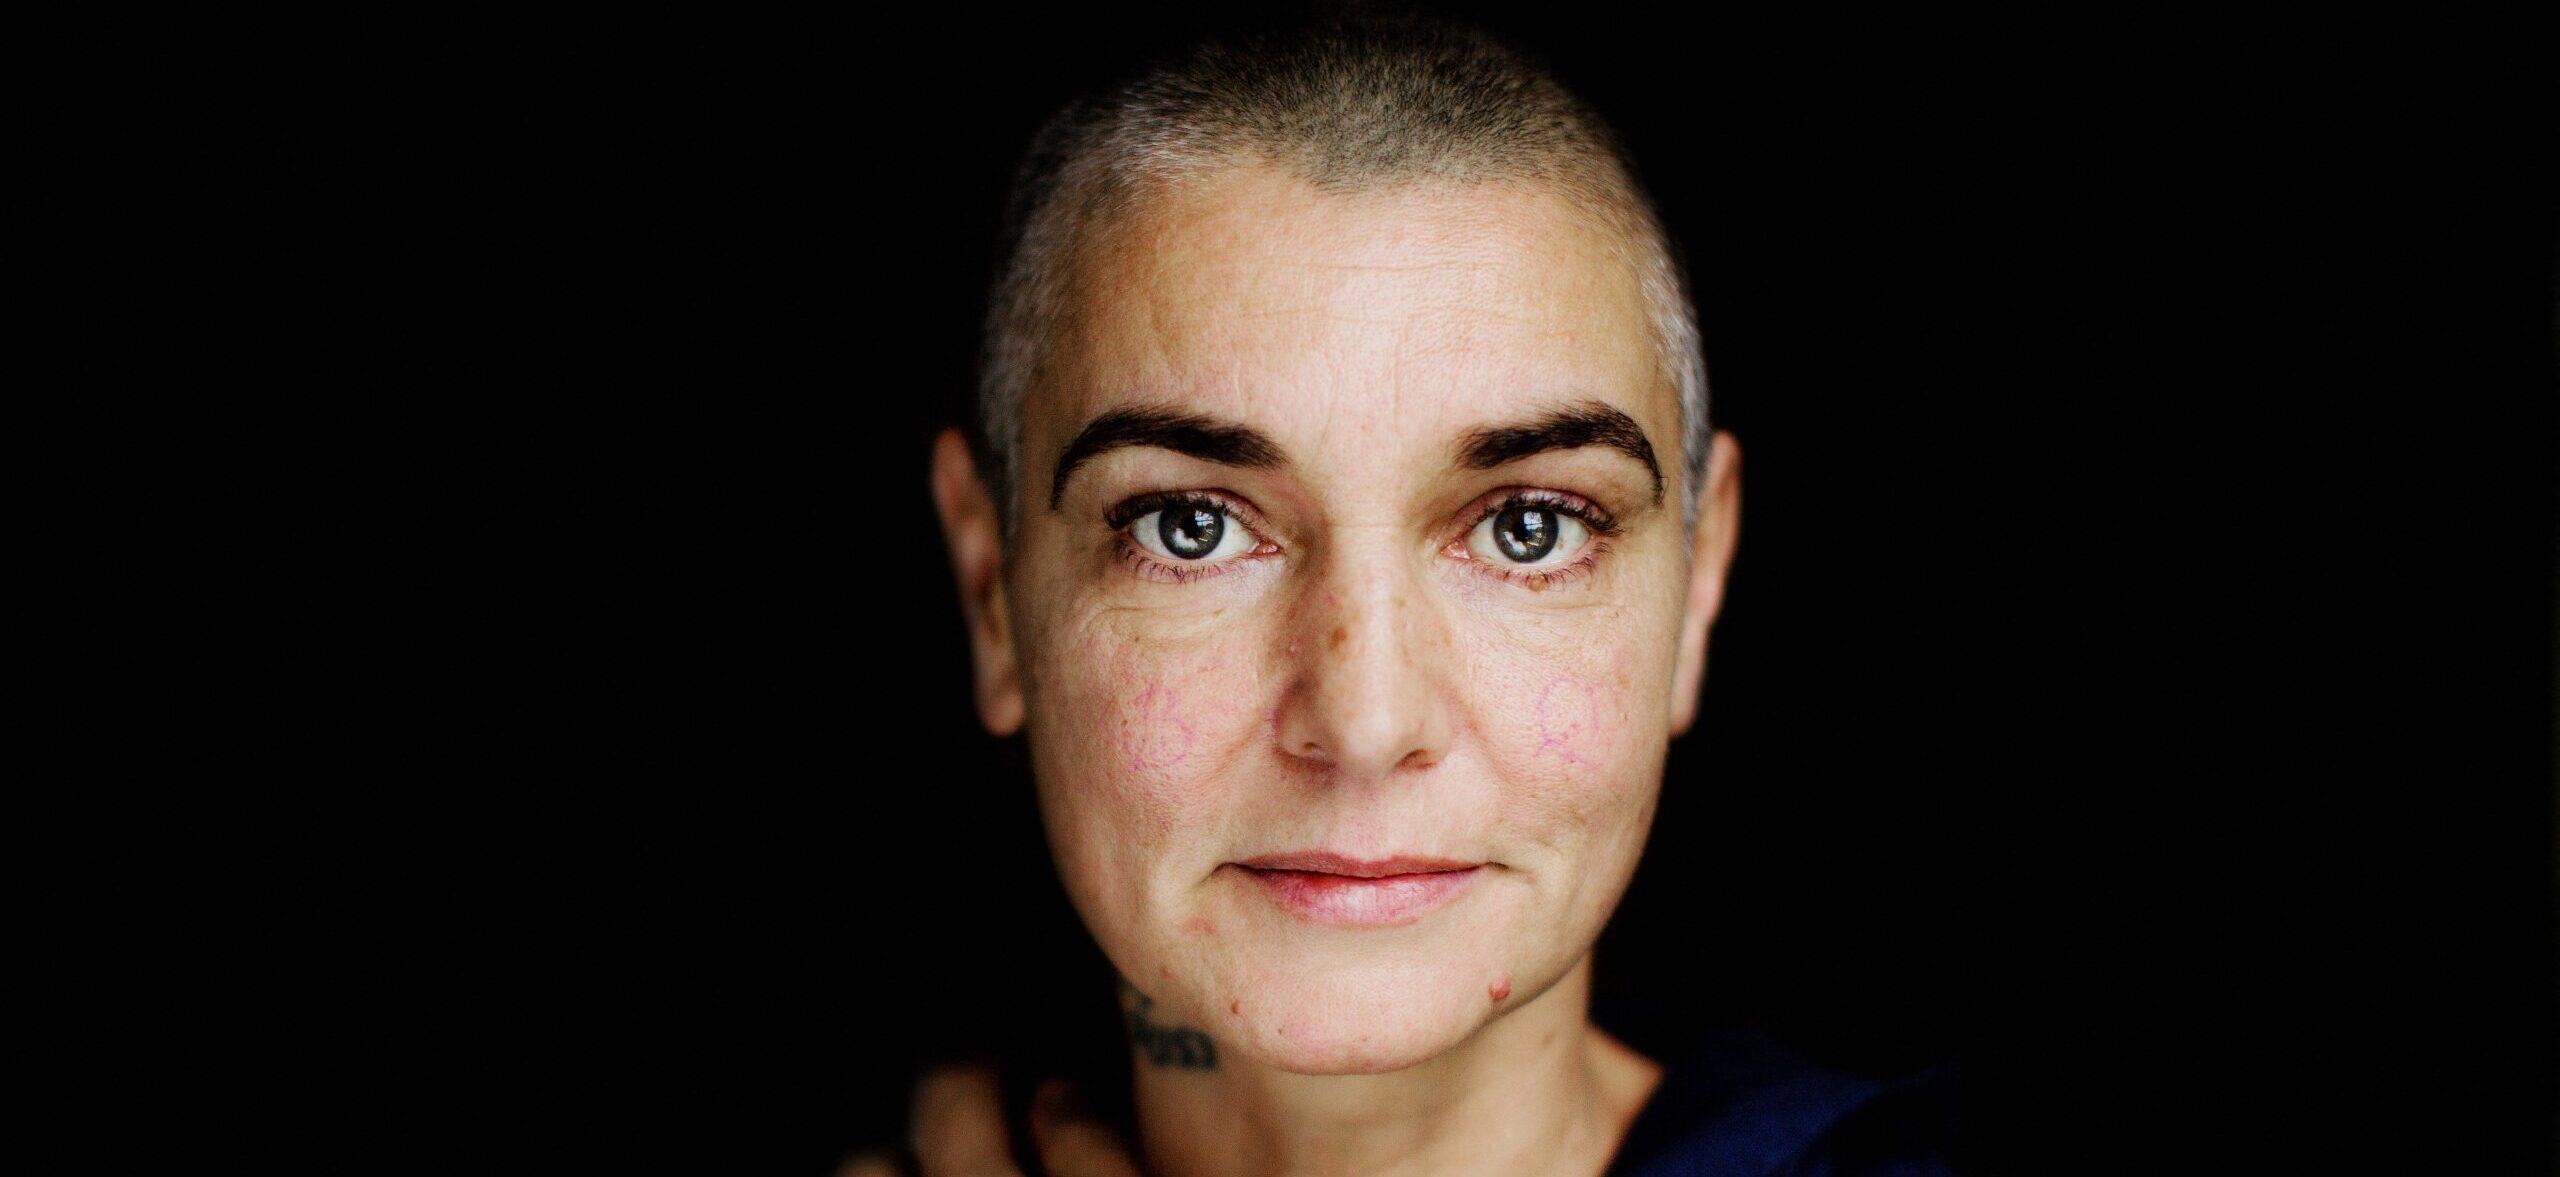 Singer Sinead O’Connor’s Official Cause of Death Revealed